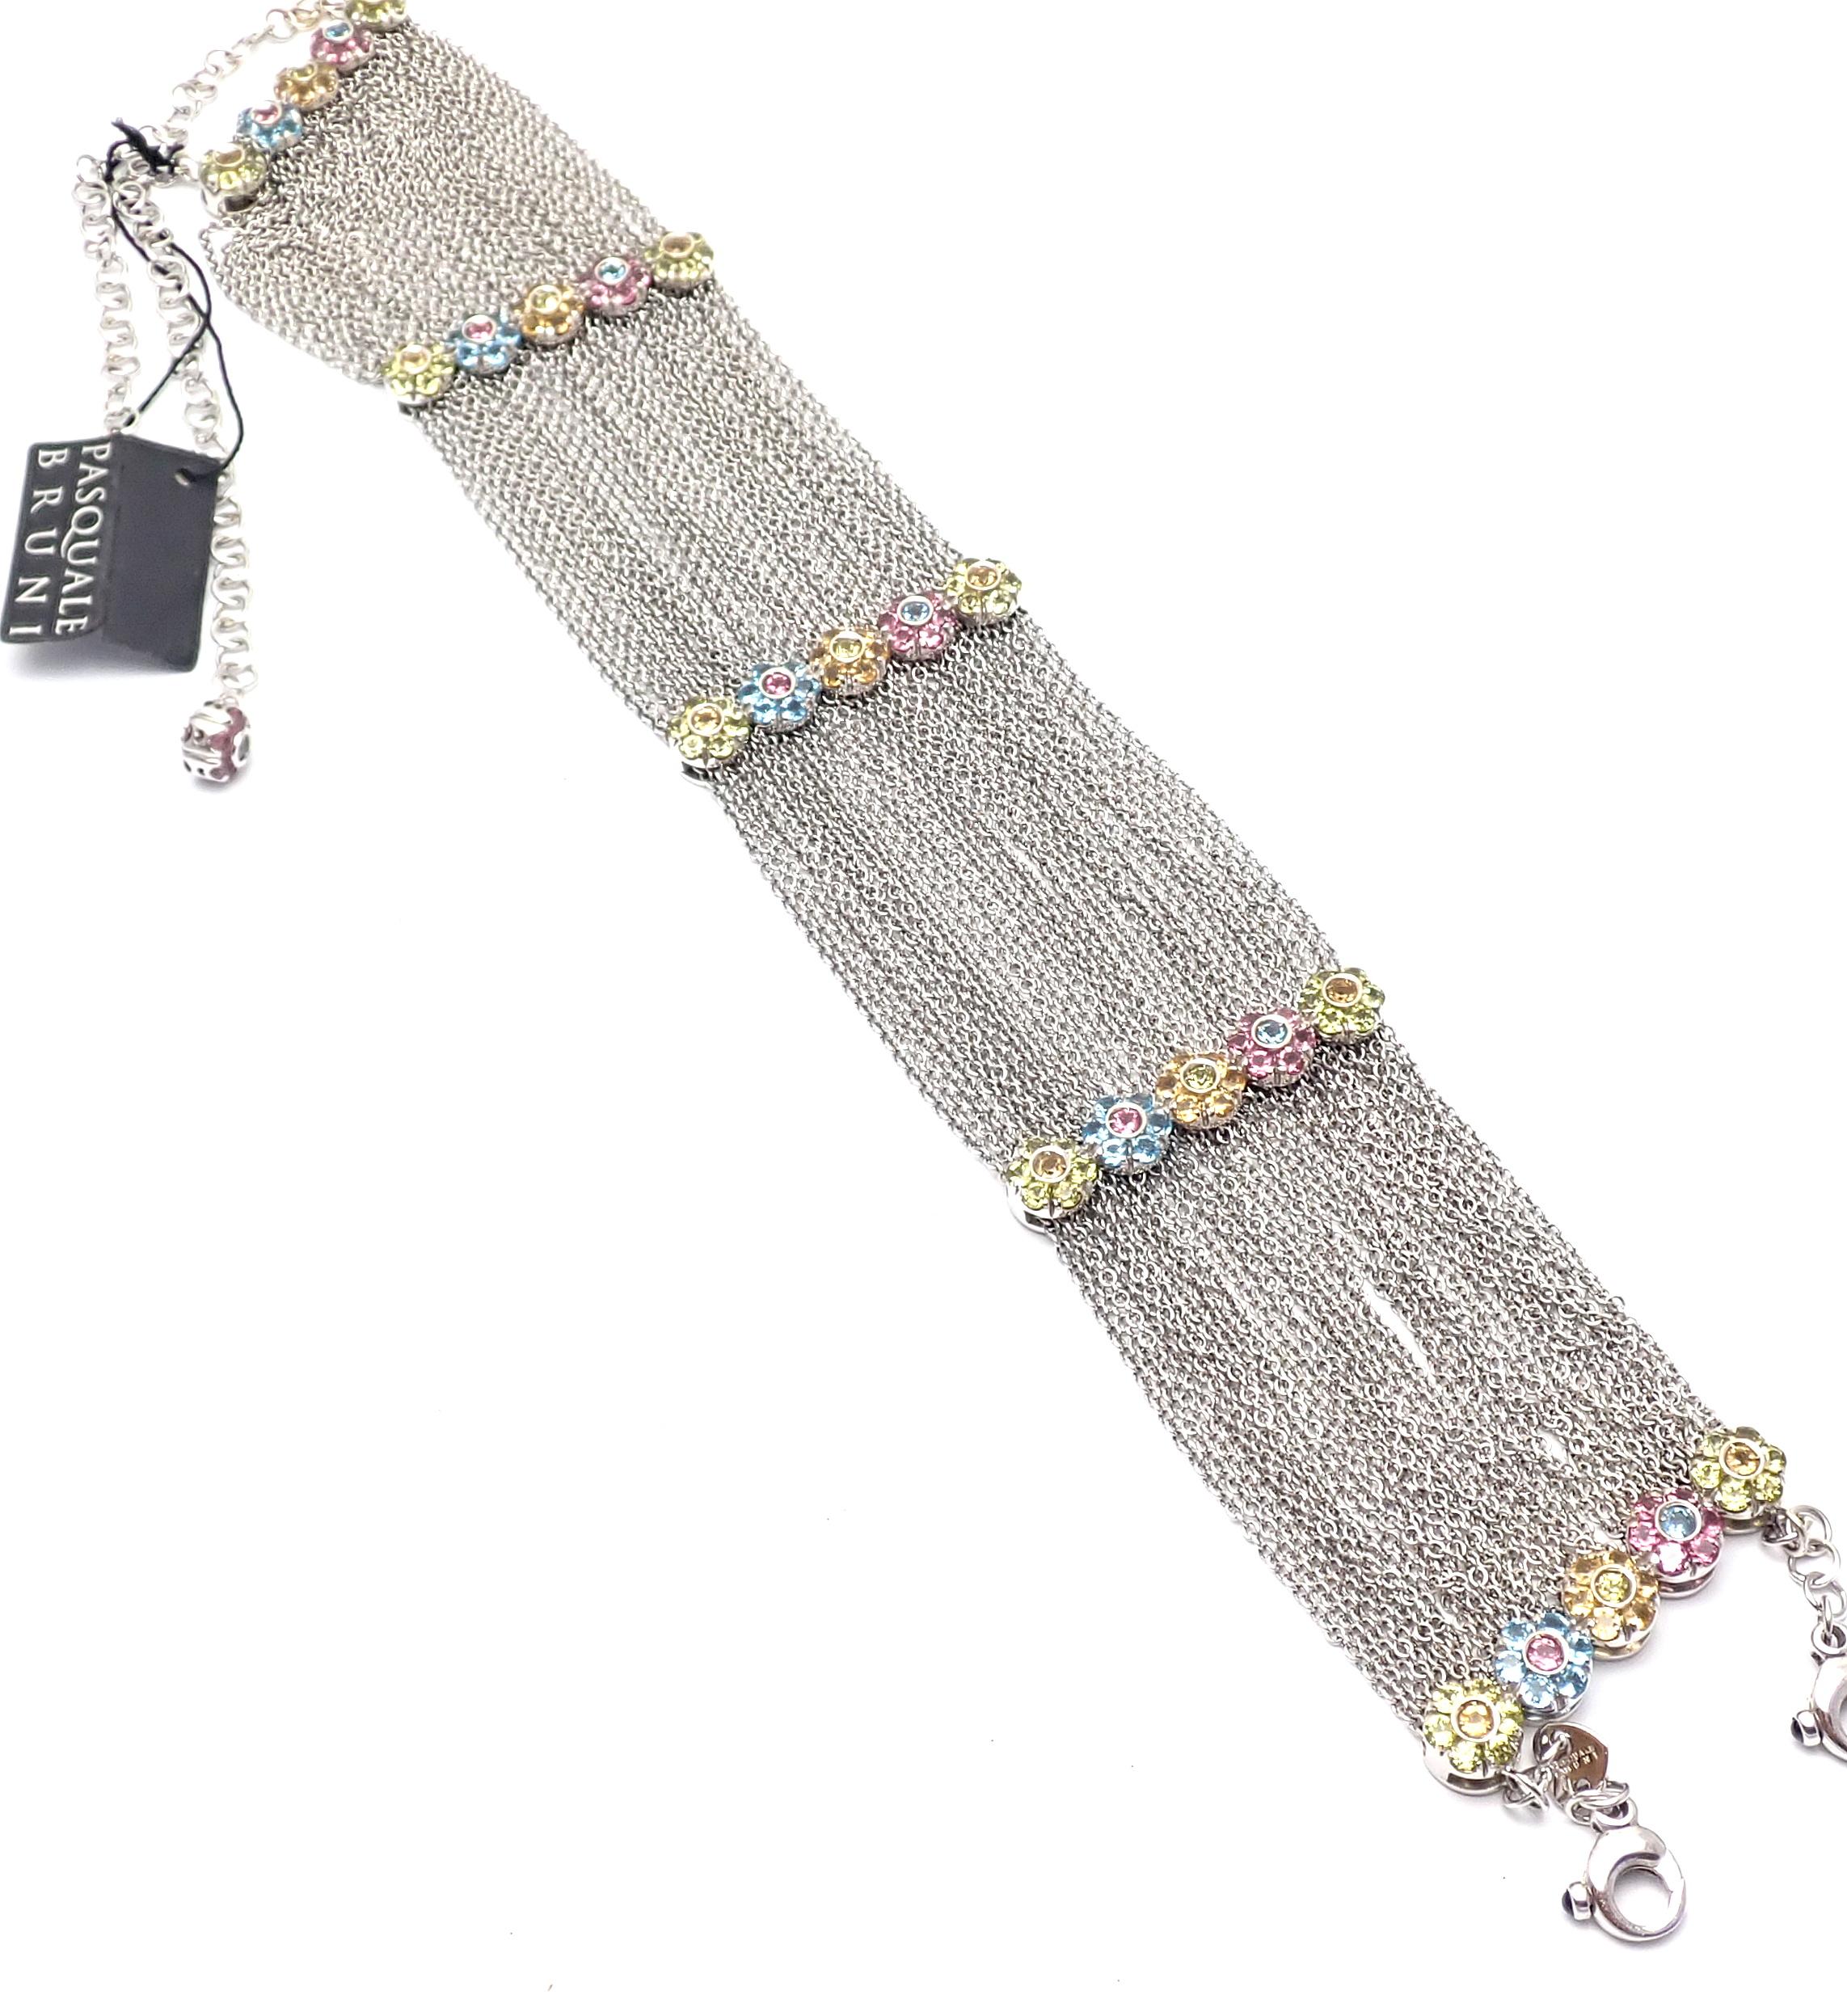 18k White Gold Citrine Topaz Peridot Chocker Necklace by Pasquale Bruni.  
With RBlue Topaz, Pink Tourmaline, Peridot, Citrine
This necklace comes with Box And Certificate.   
Details:  
Length: 15